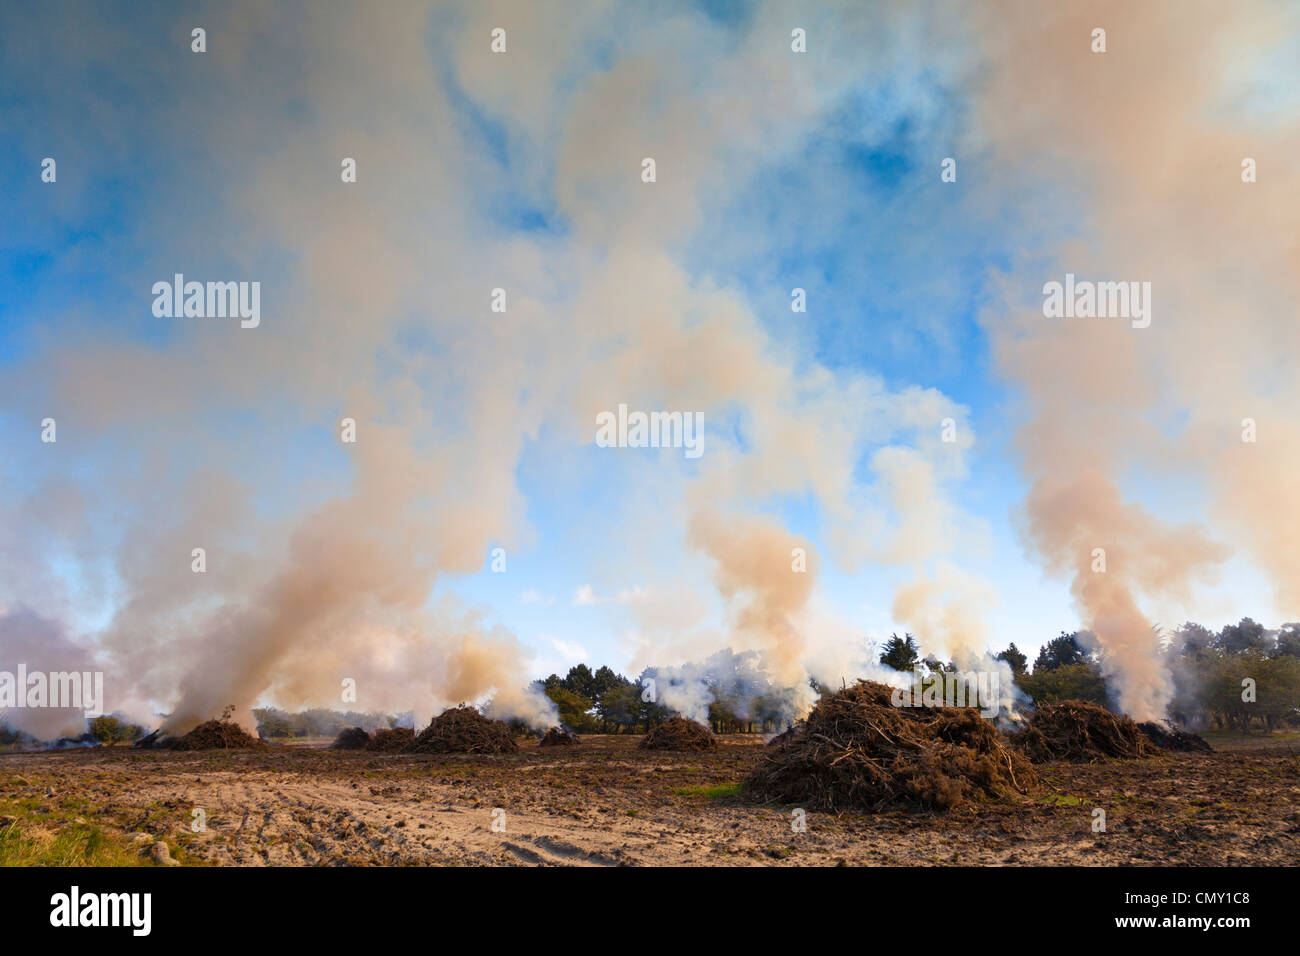 Bonfire in a field or paddock on the West Coast of New Zealand, where gorse has been cleared and is being burned. Stock Photo